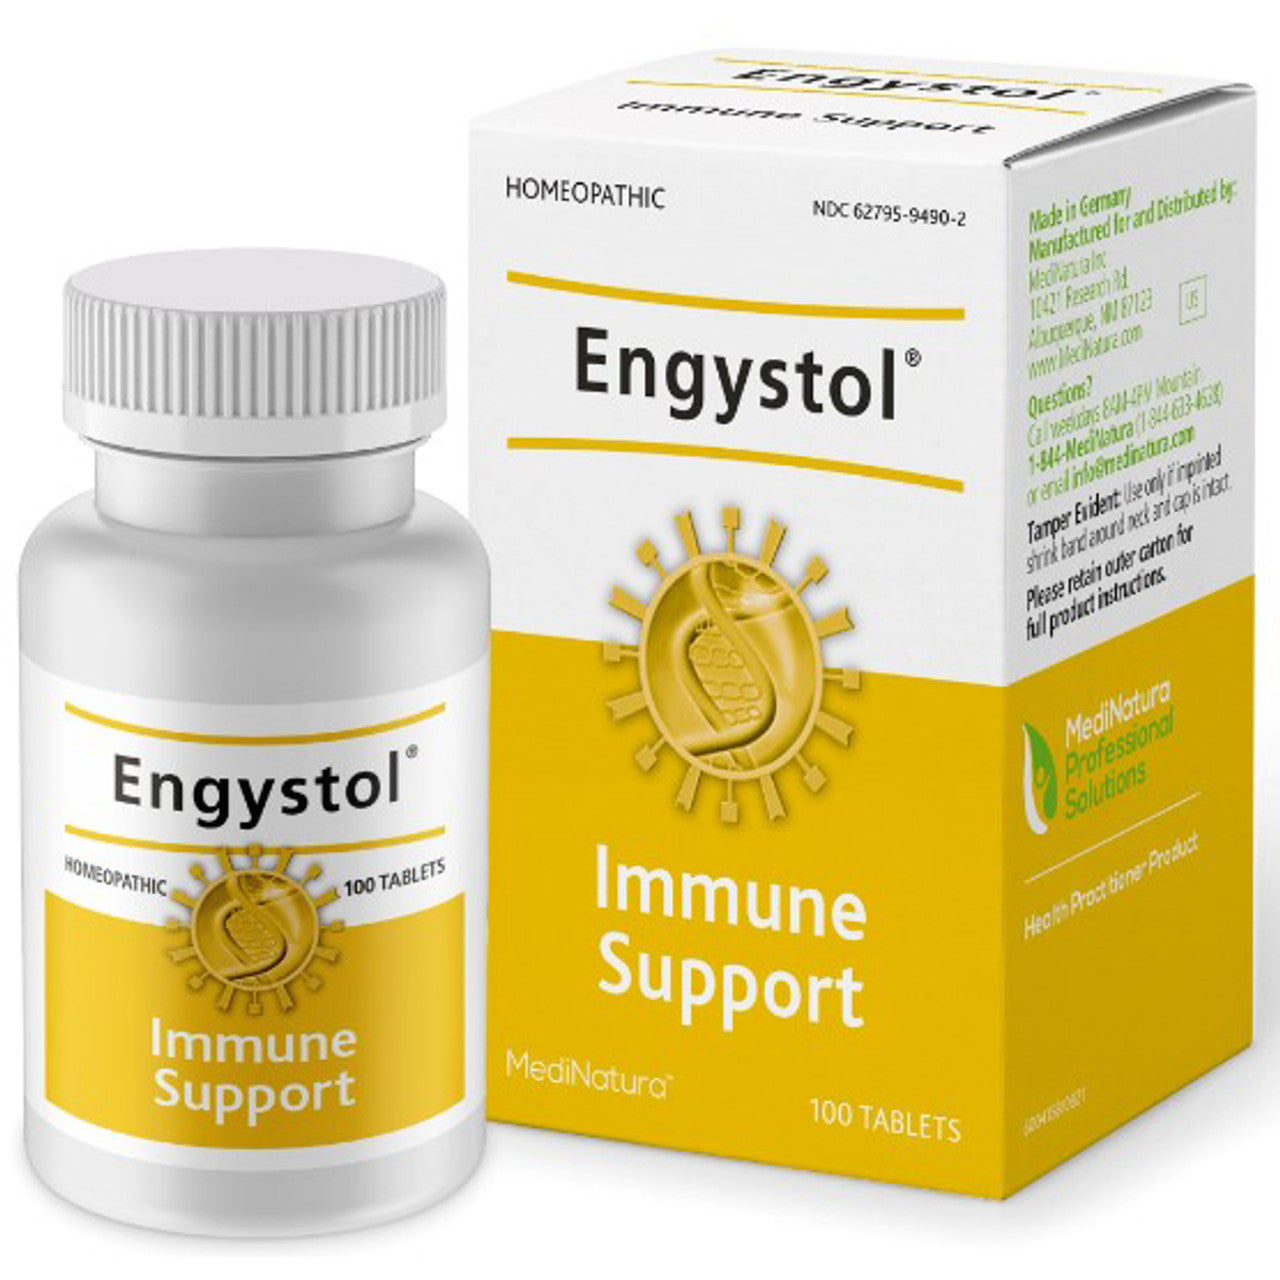 Primary Image of Medinatura Engystol Immune Support (100 Tablets) 